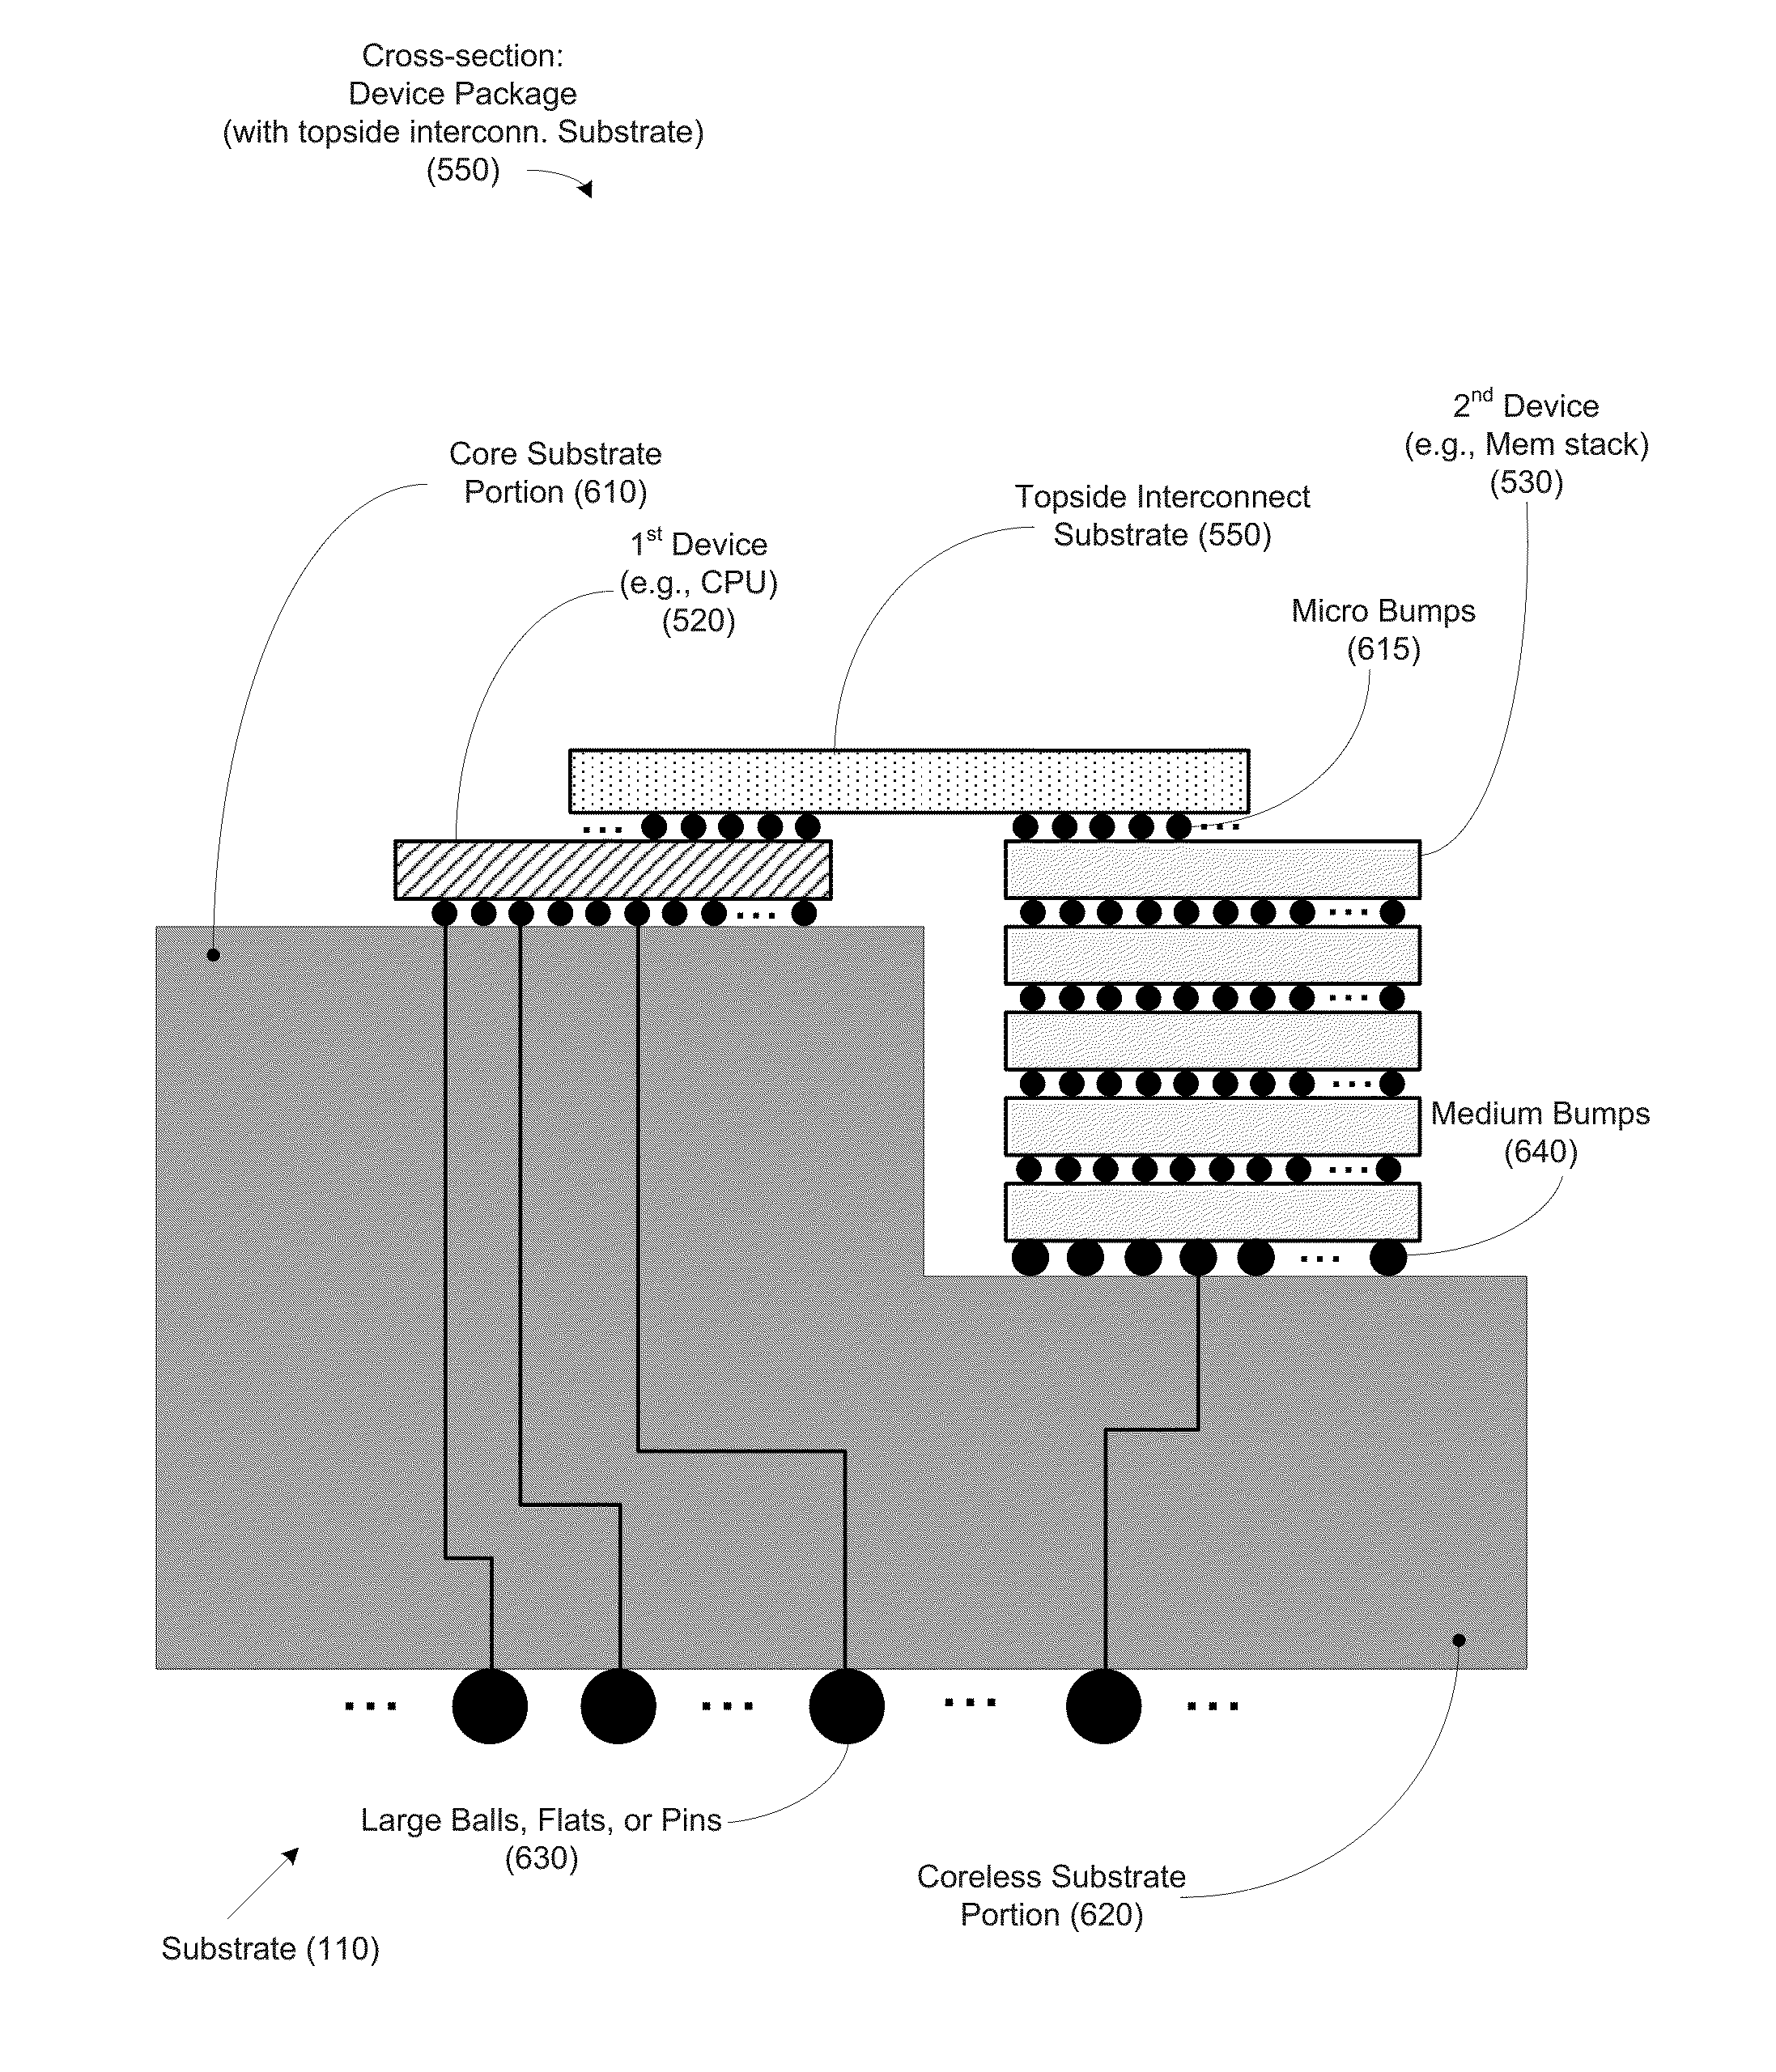 Top-side interconnection substrate for die-to-die interconnection